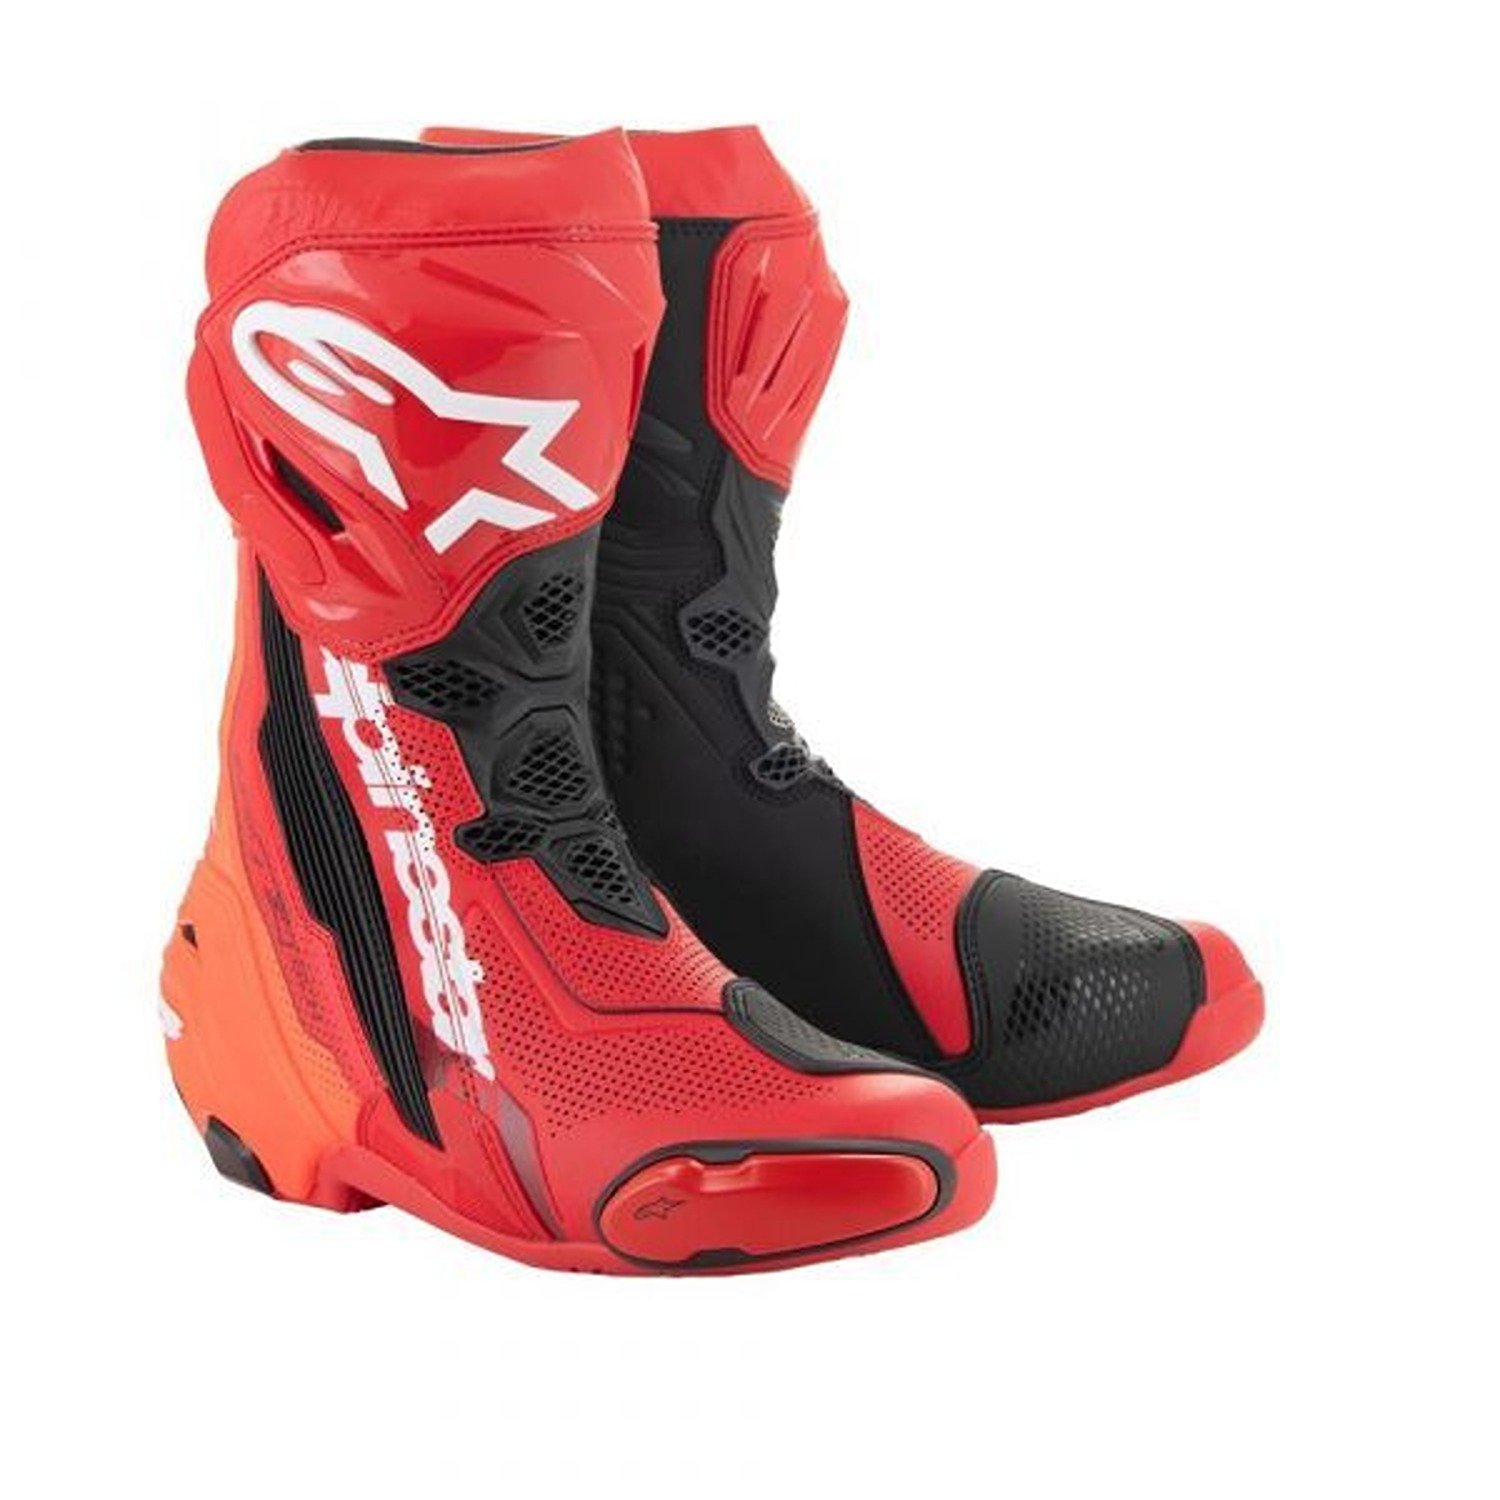 Image of EU Alpinestars Supertech R Vented Boots Bright Red Red Fluo Taille 45